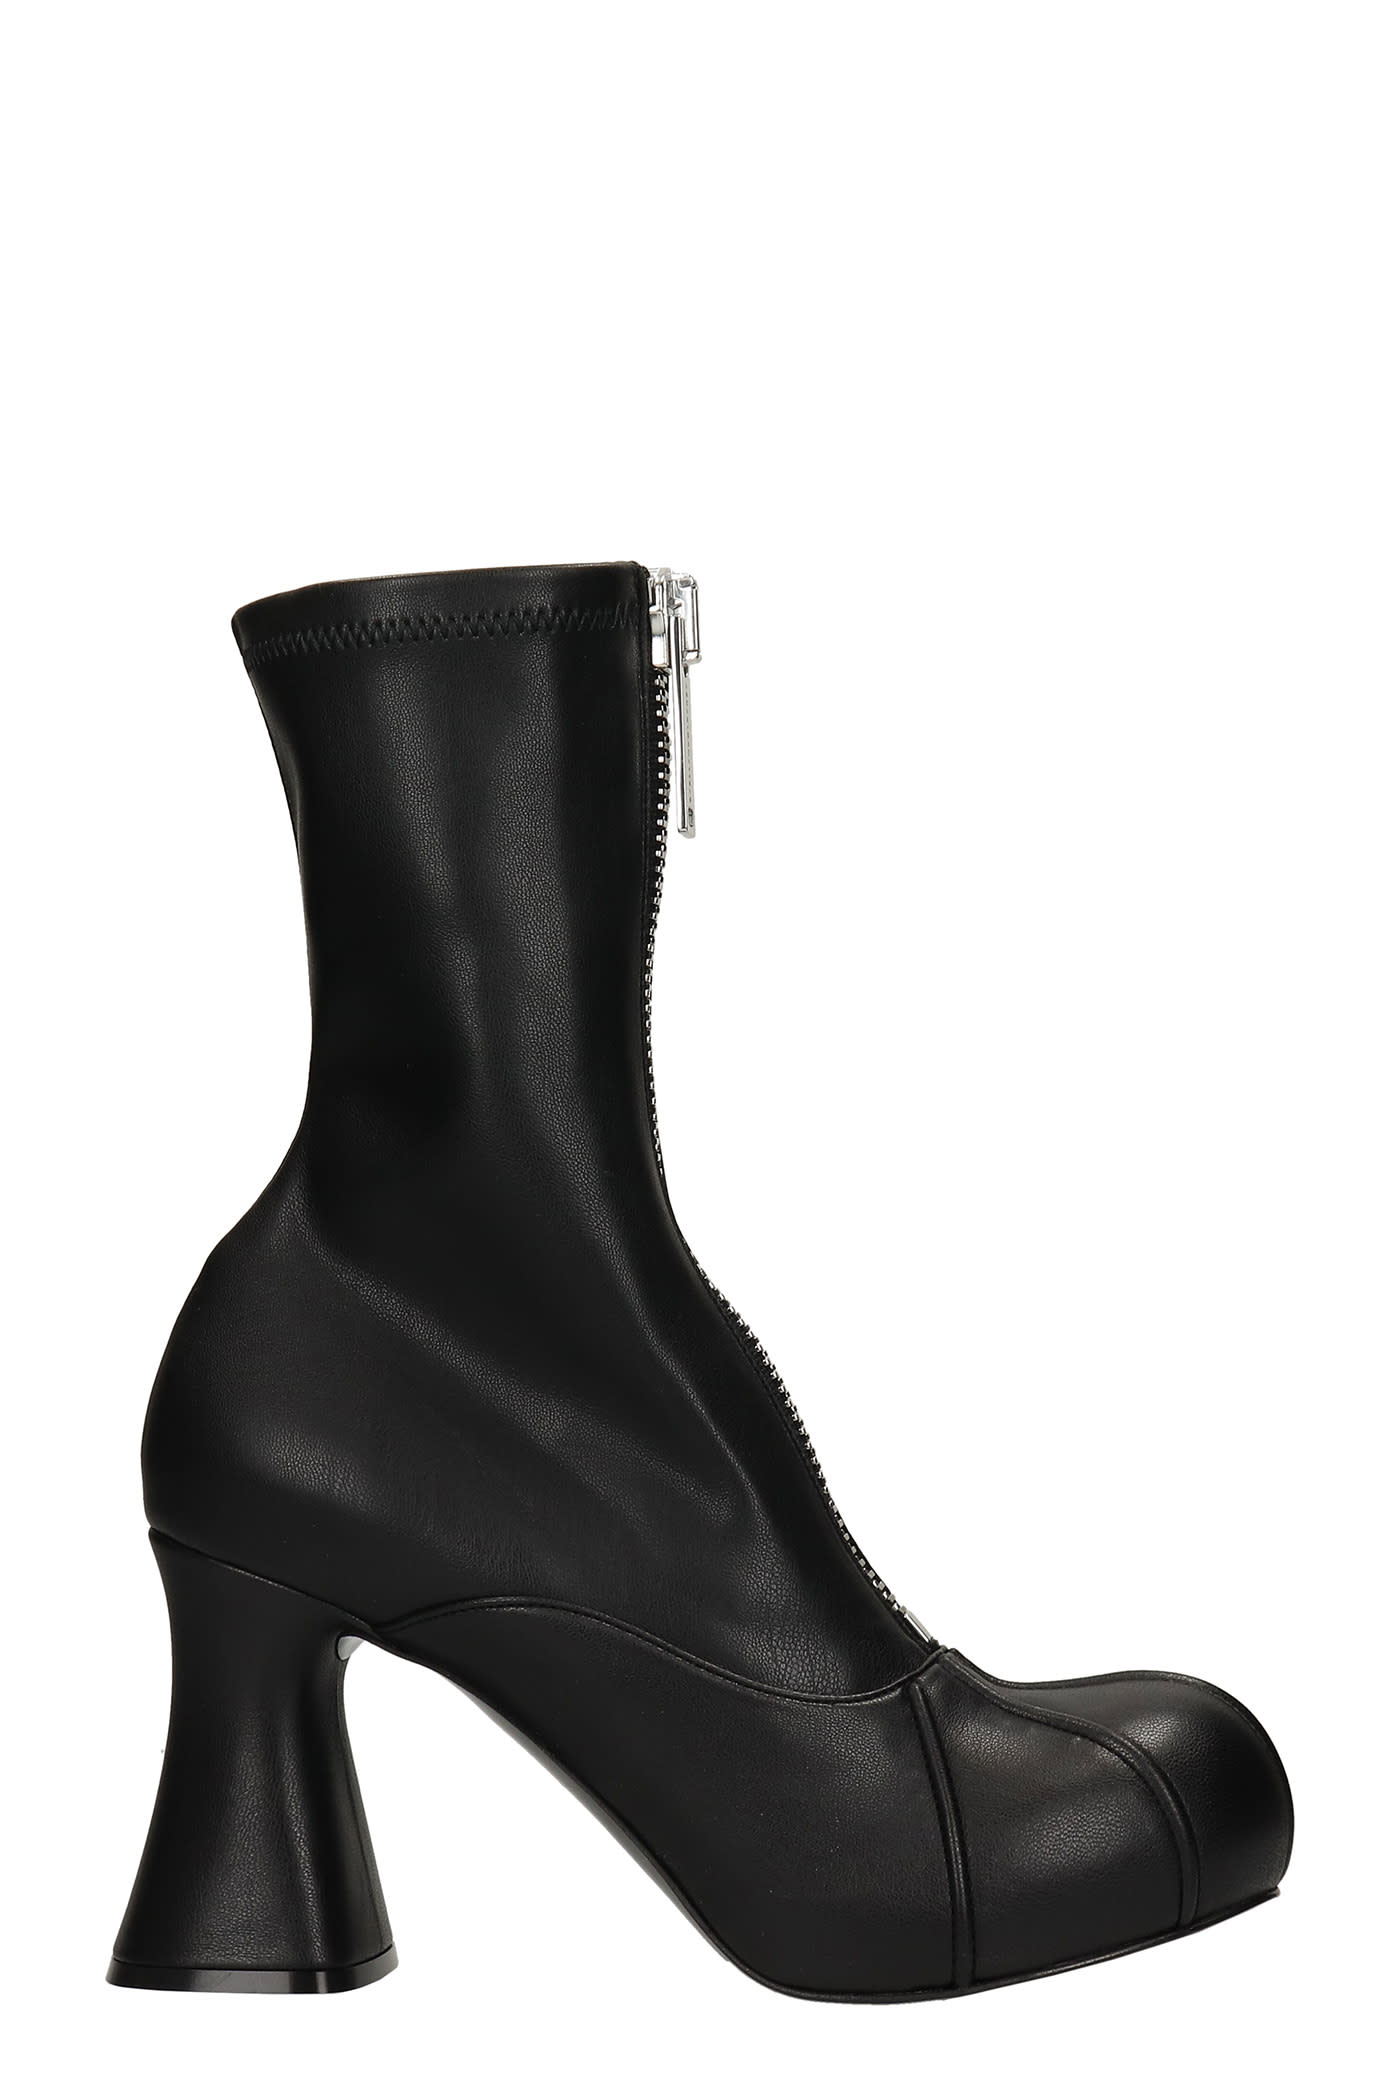 Stella McCartney Groove Strech High Heels Ankle Boots In Black Polyester